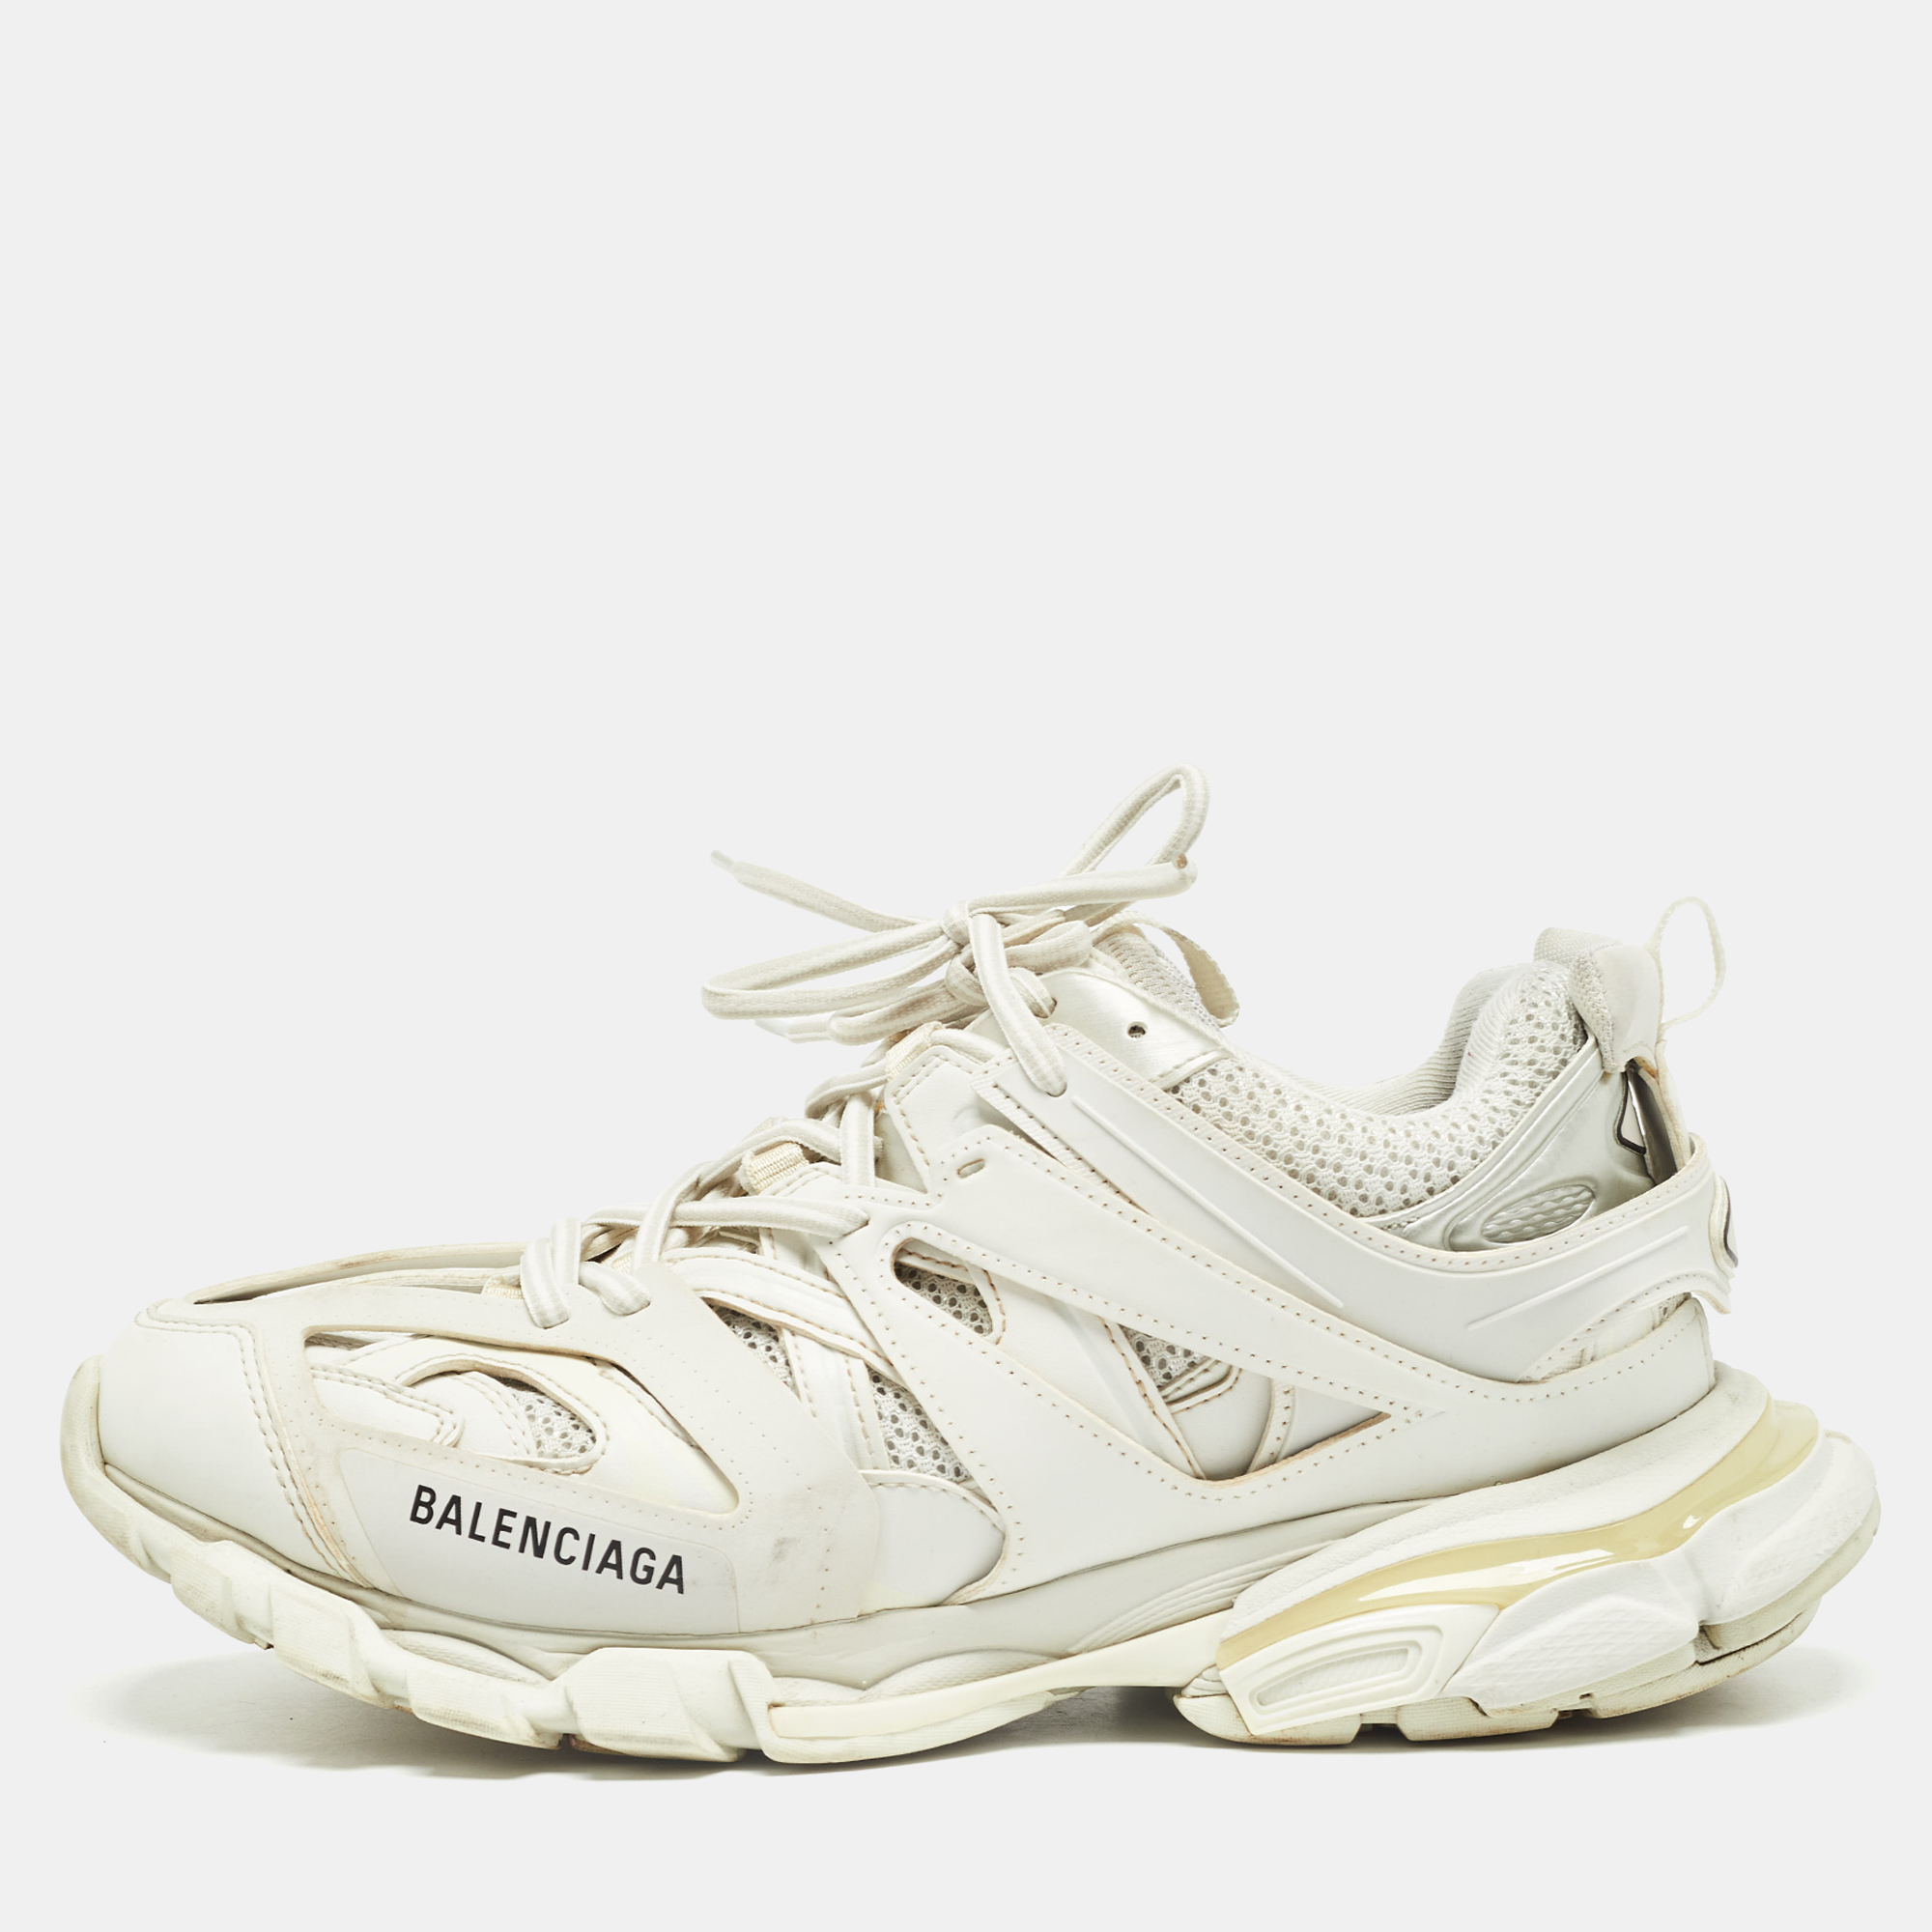 

Balenciaga Grey/White Faux Leather and Mesh Sneakers Size